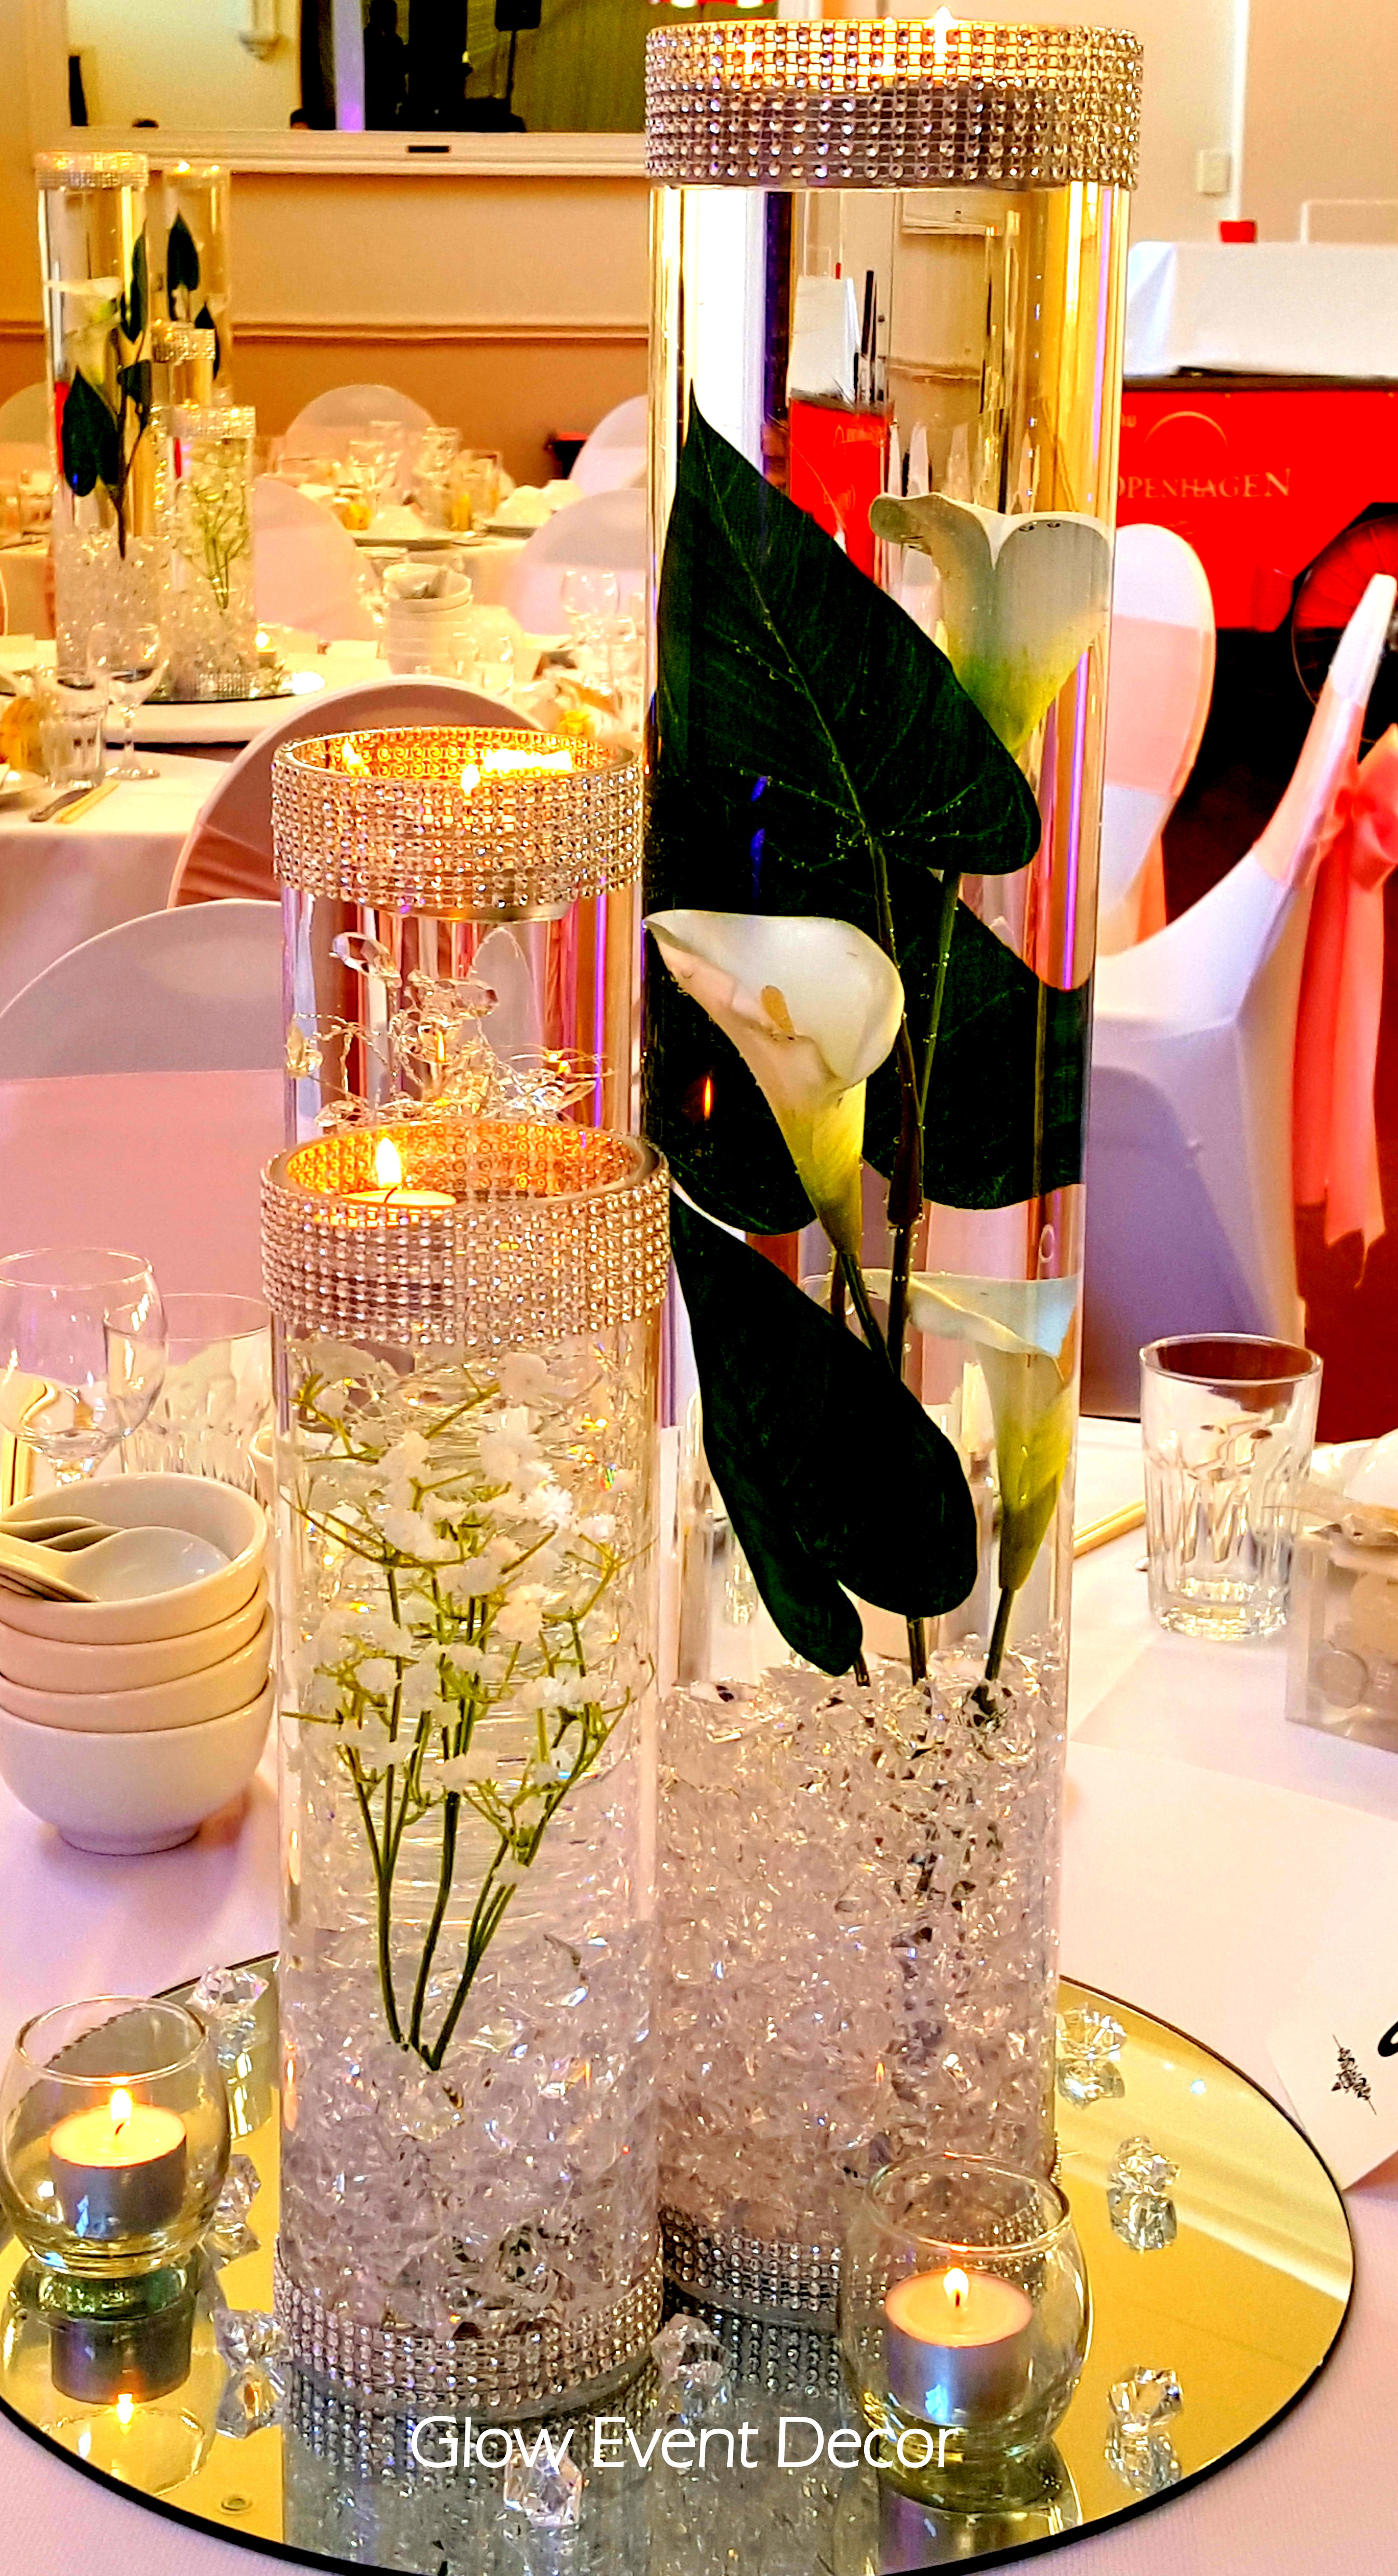 24 Recommended Extra Large Brandy Glass Vase 2022 free download extra large brandy glass vase of led orchid cylinder vase glow event decor within cylinder vase trio submerged lillies gyp sophlia bablies breath crystal garland for bridal